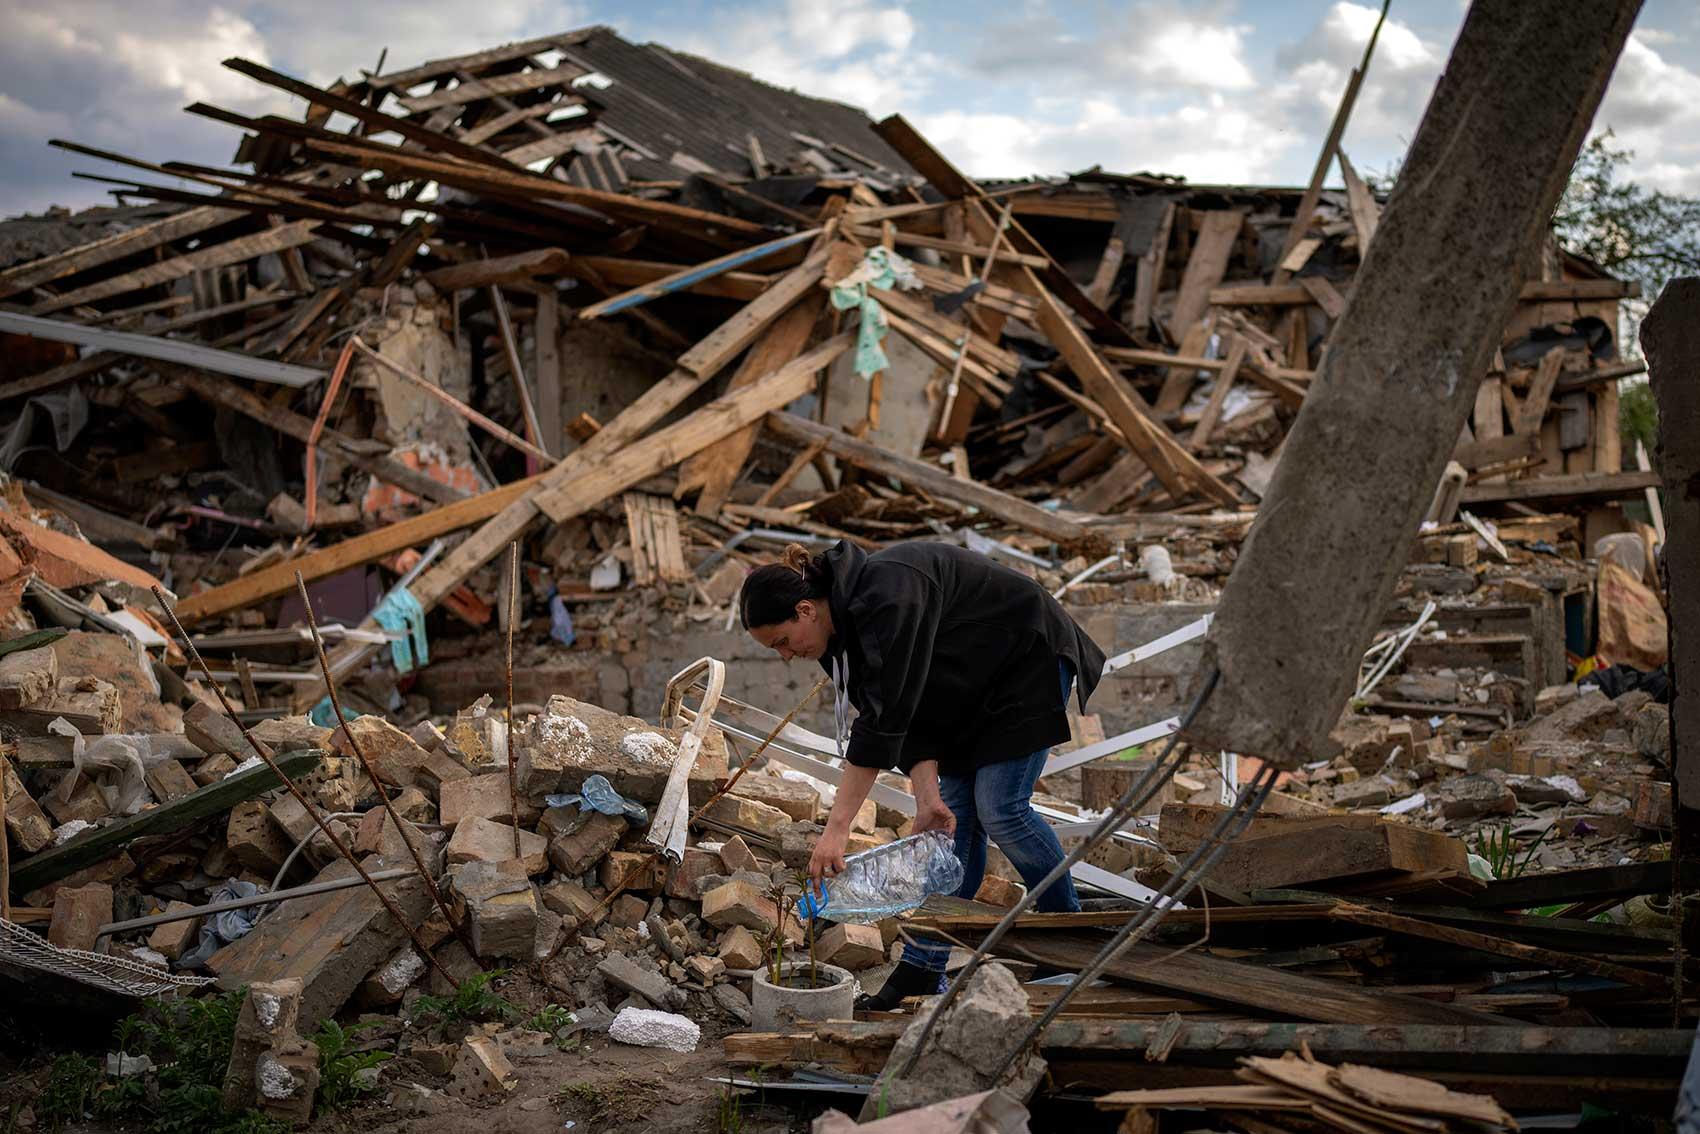 Woman waters flowers amid destroyed house